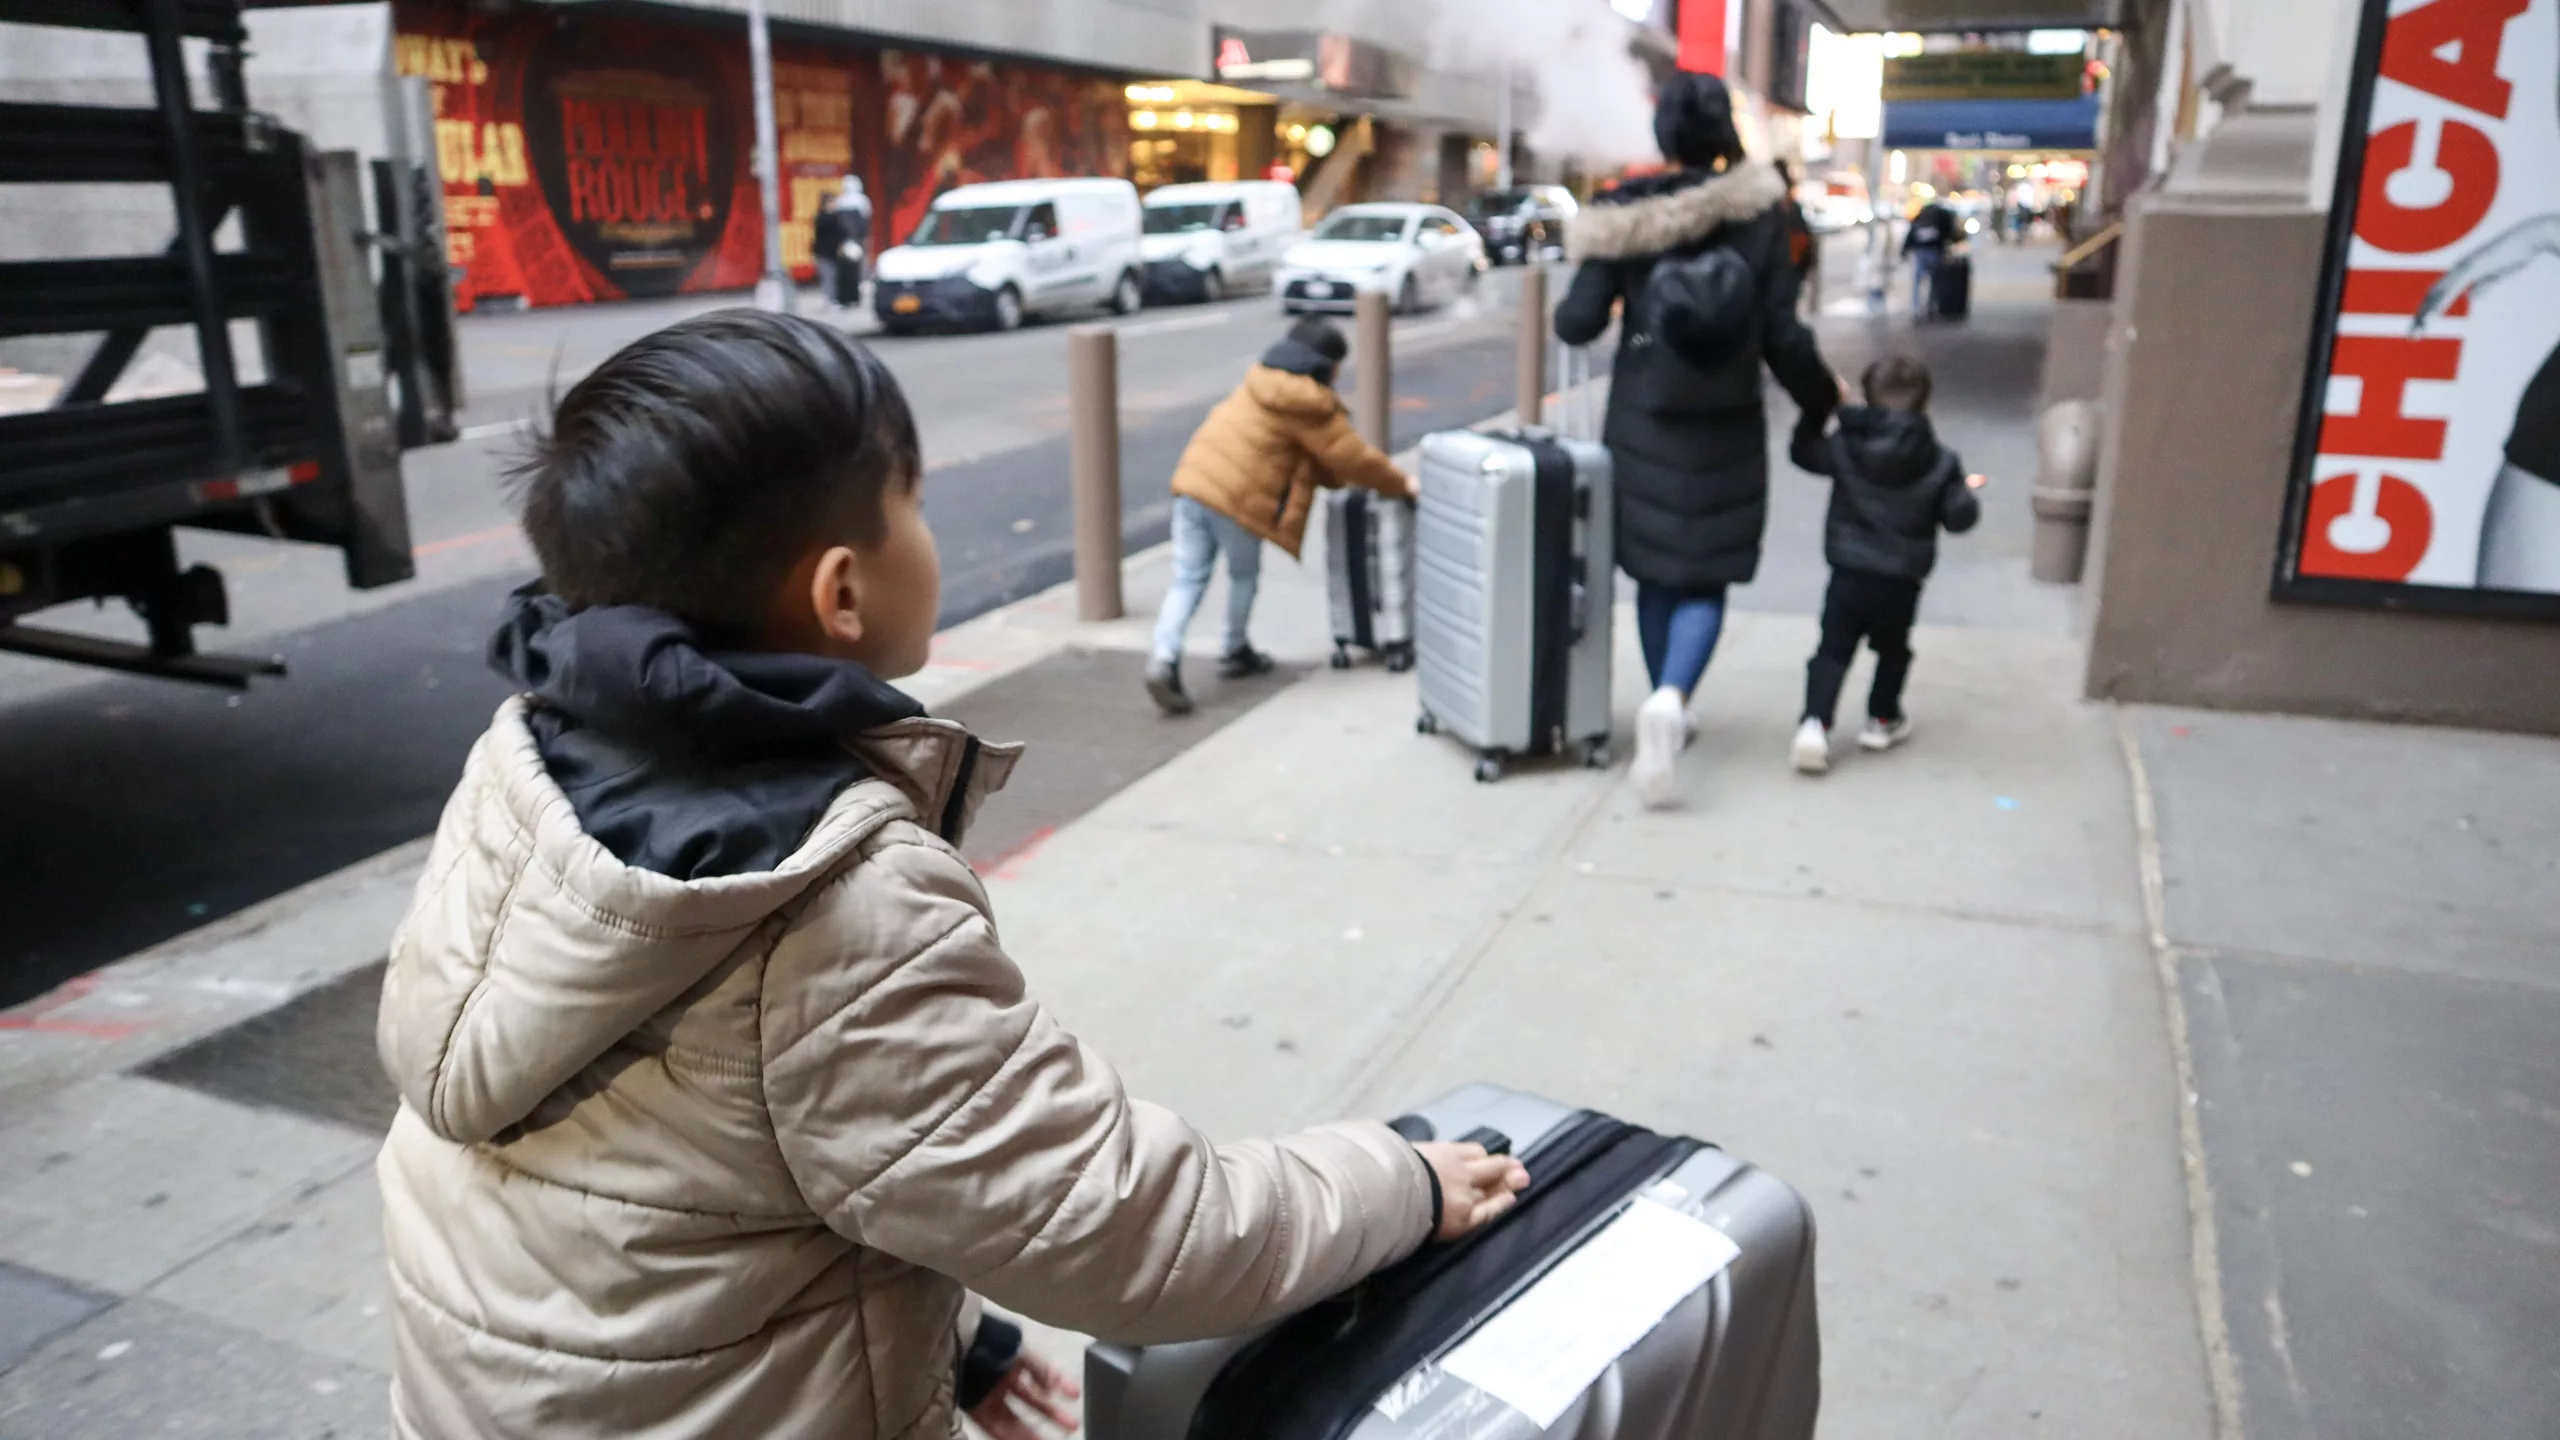 Immigration News Today: NYC Has Highest Level of Homeless Children